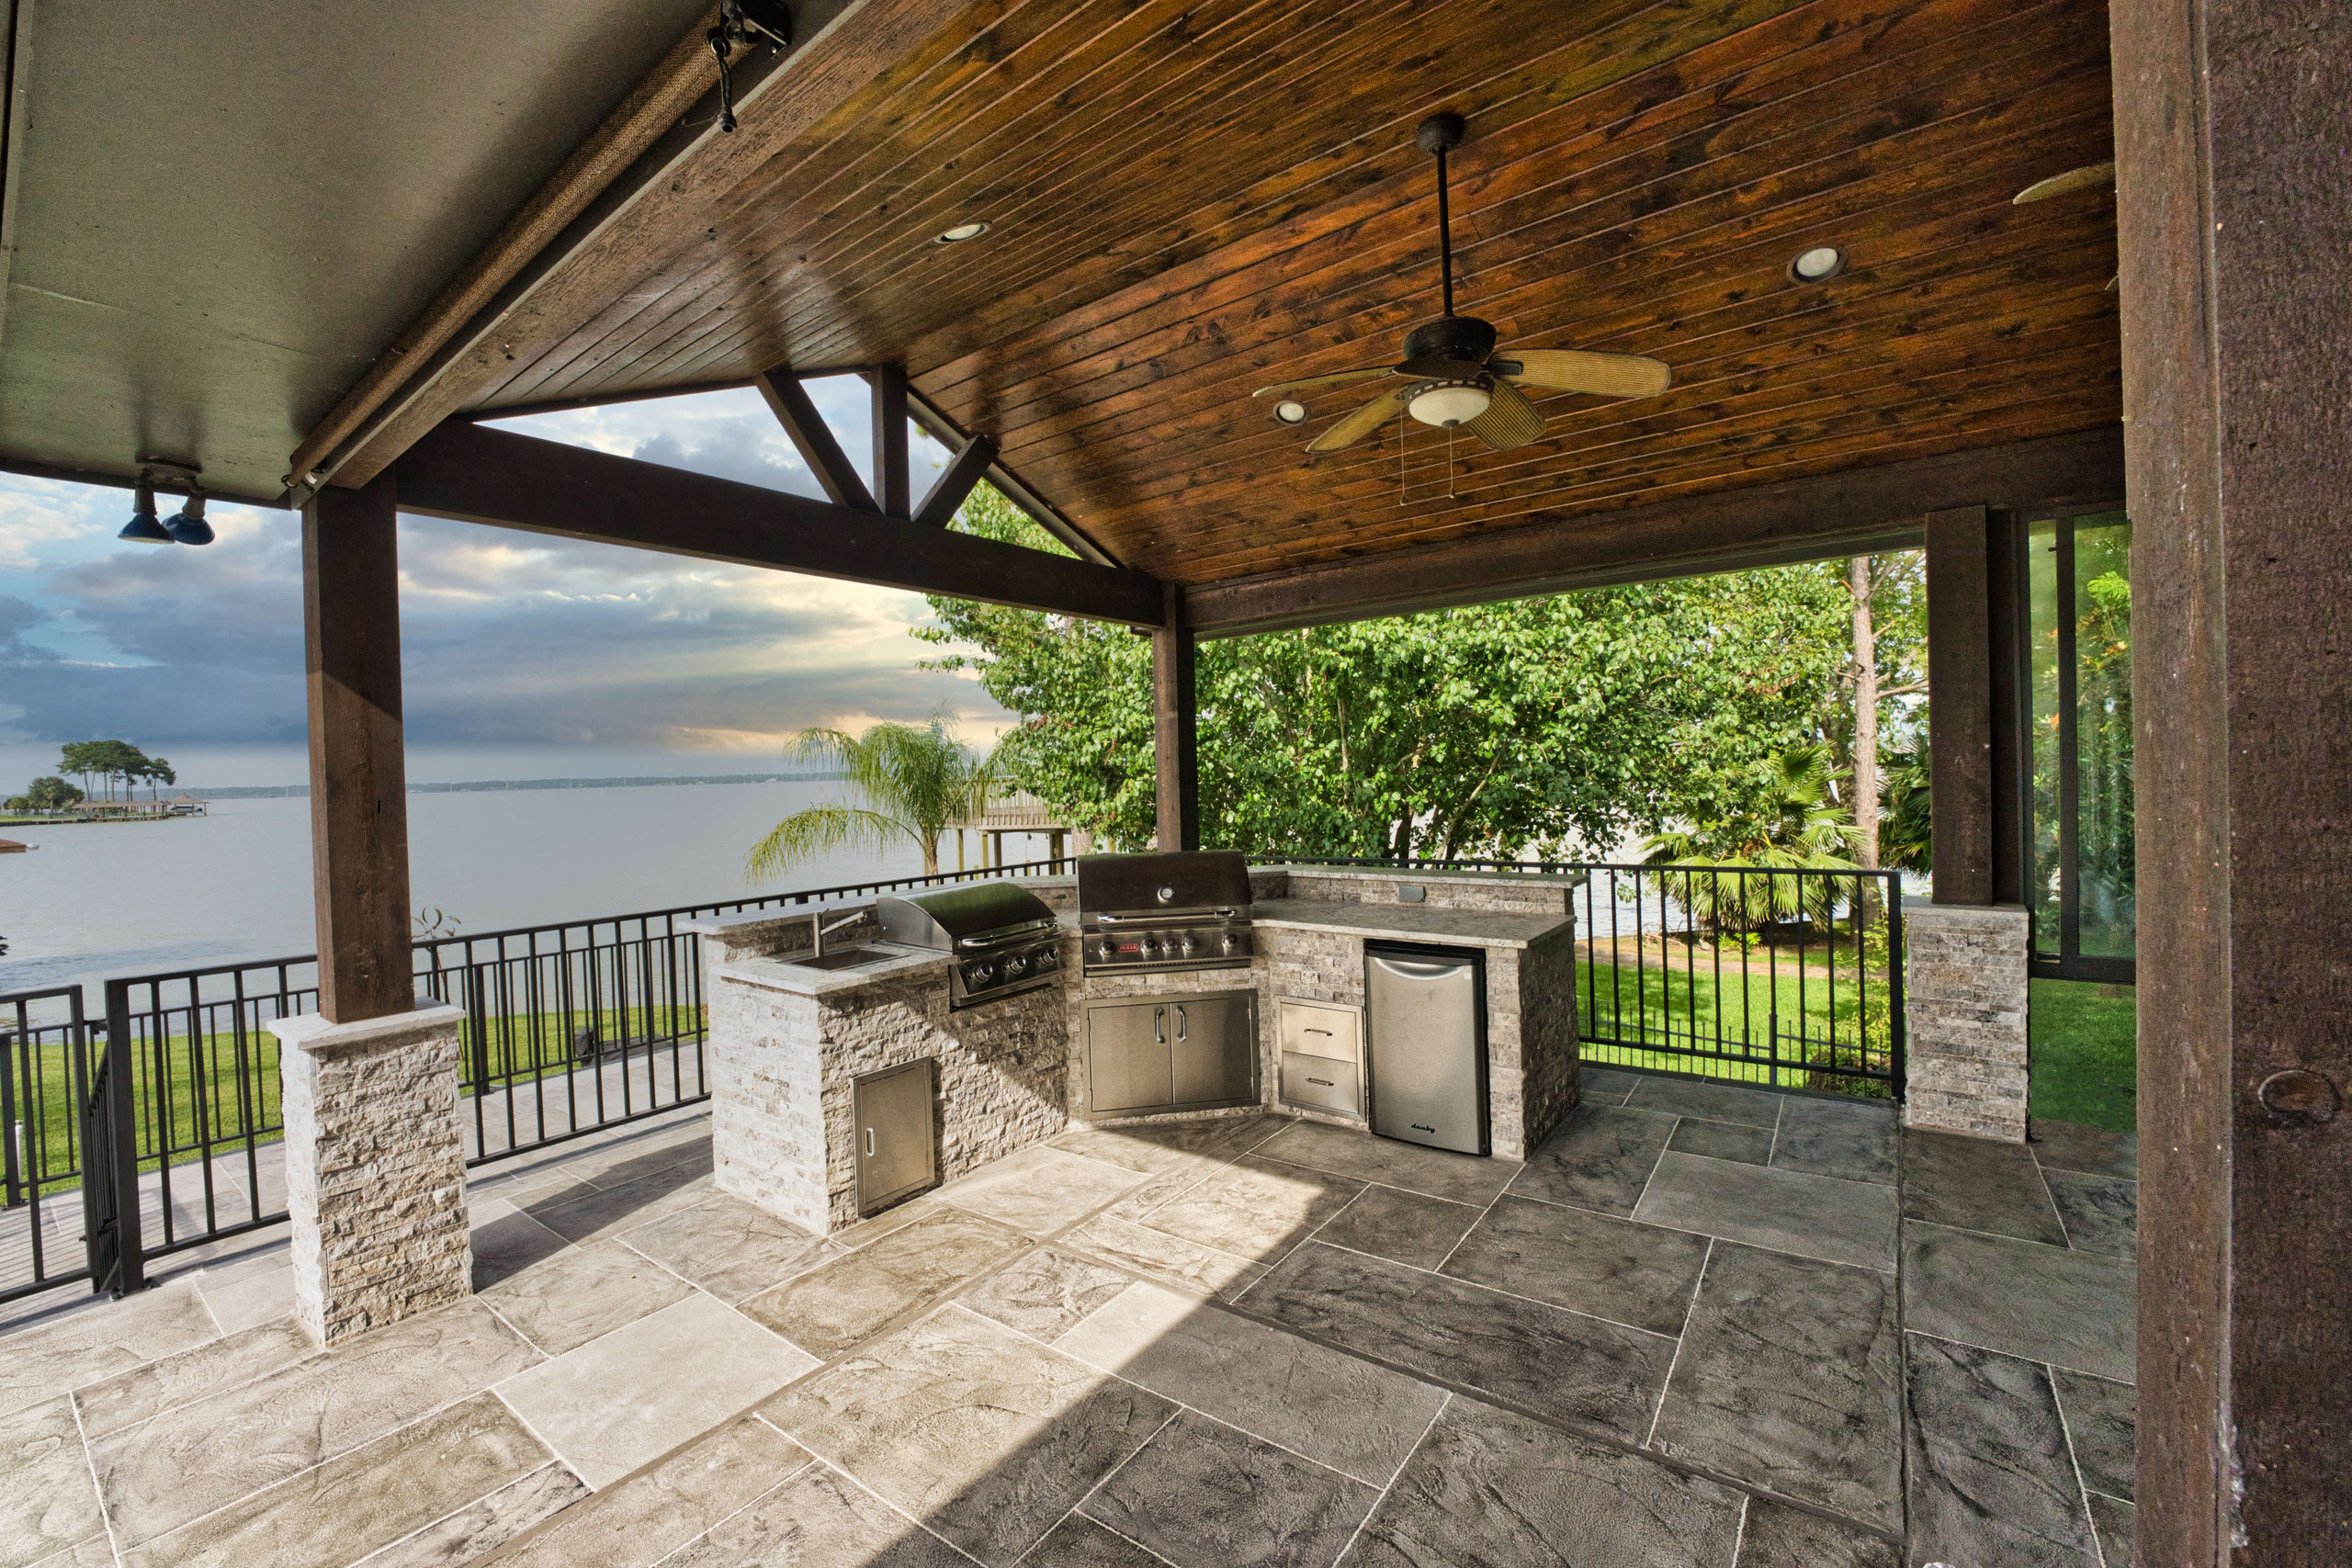 Outdoor kitchen grill and cedar patio cover